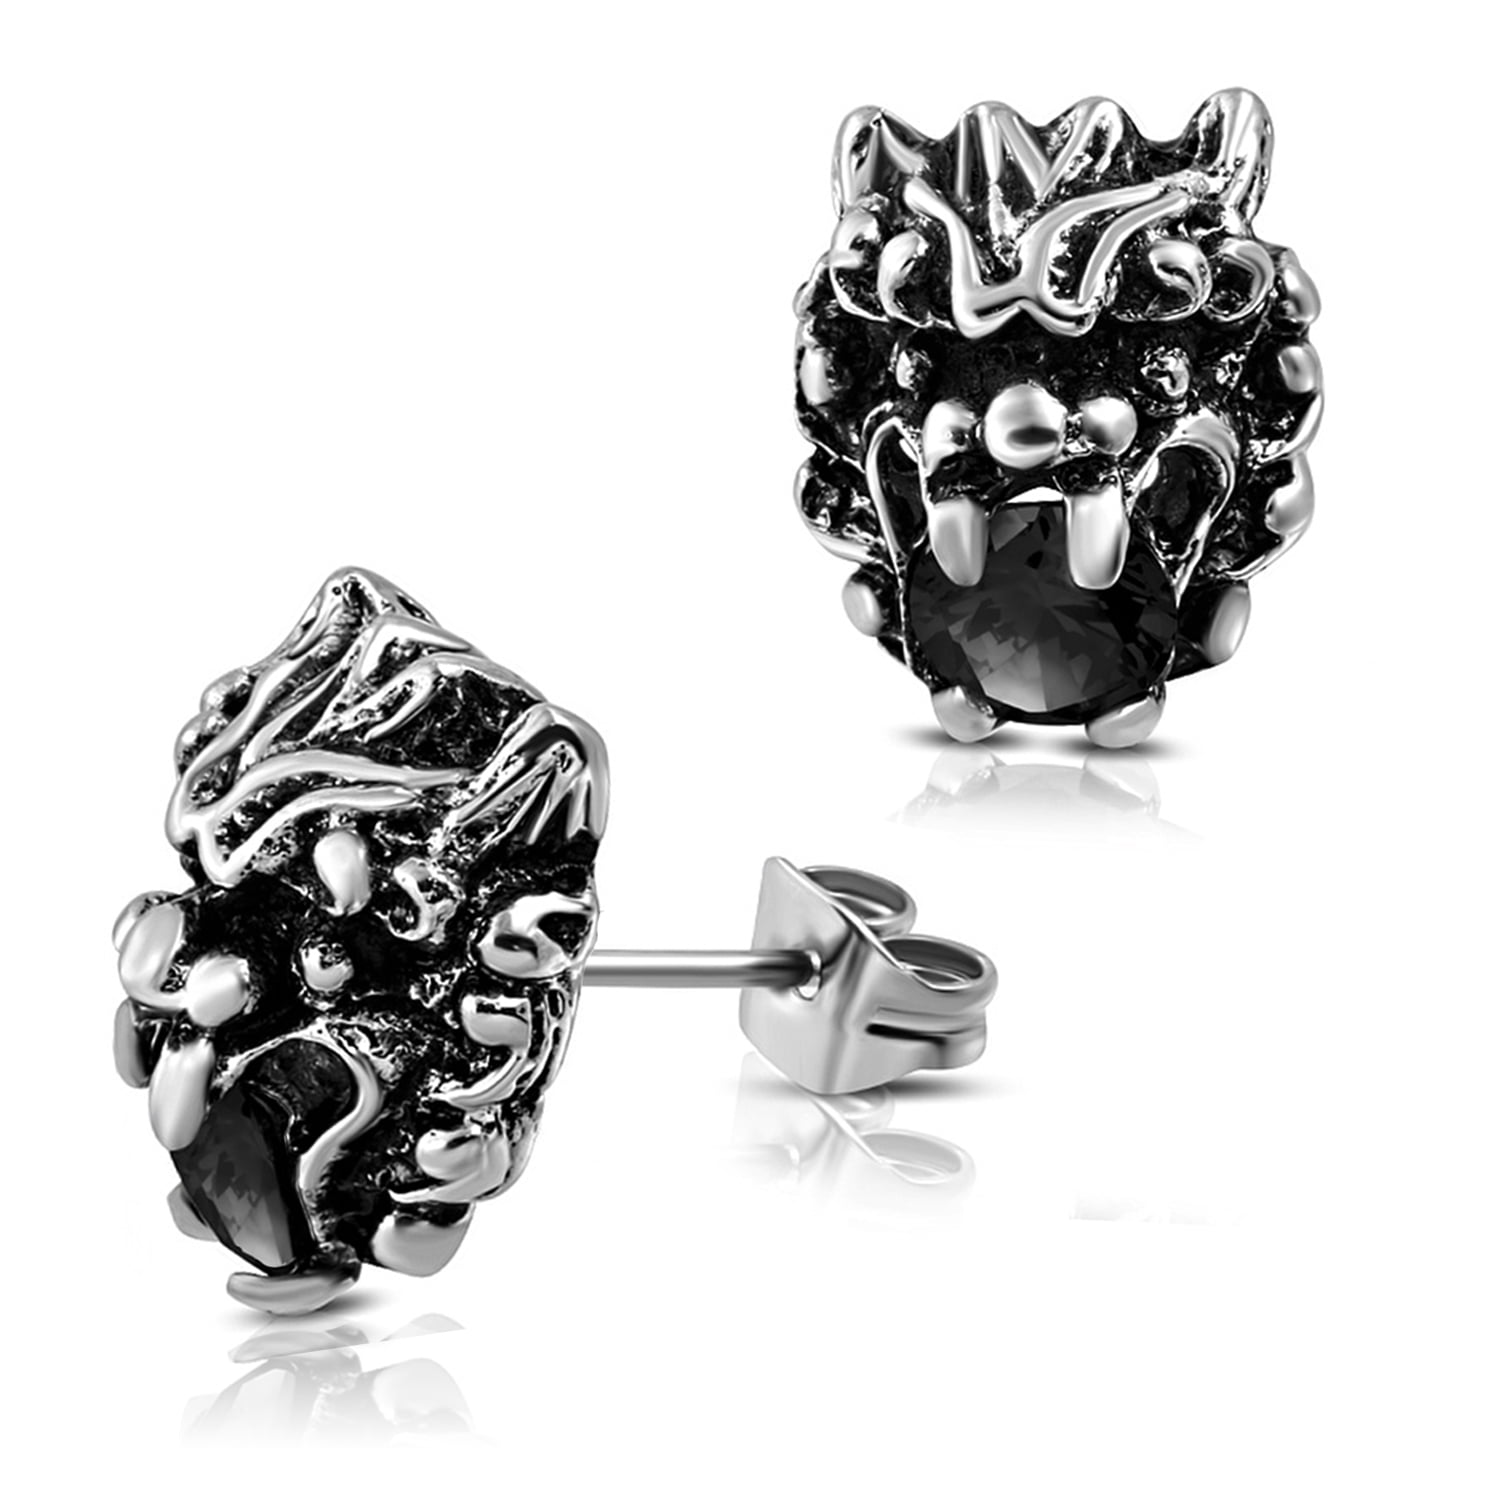 Stainless Steel Tiny Mouse Silhouette Button Stud Post Earrings Comfort Zone Studios SE-00045-BK